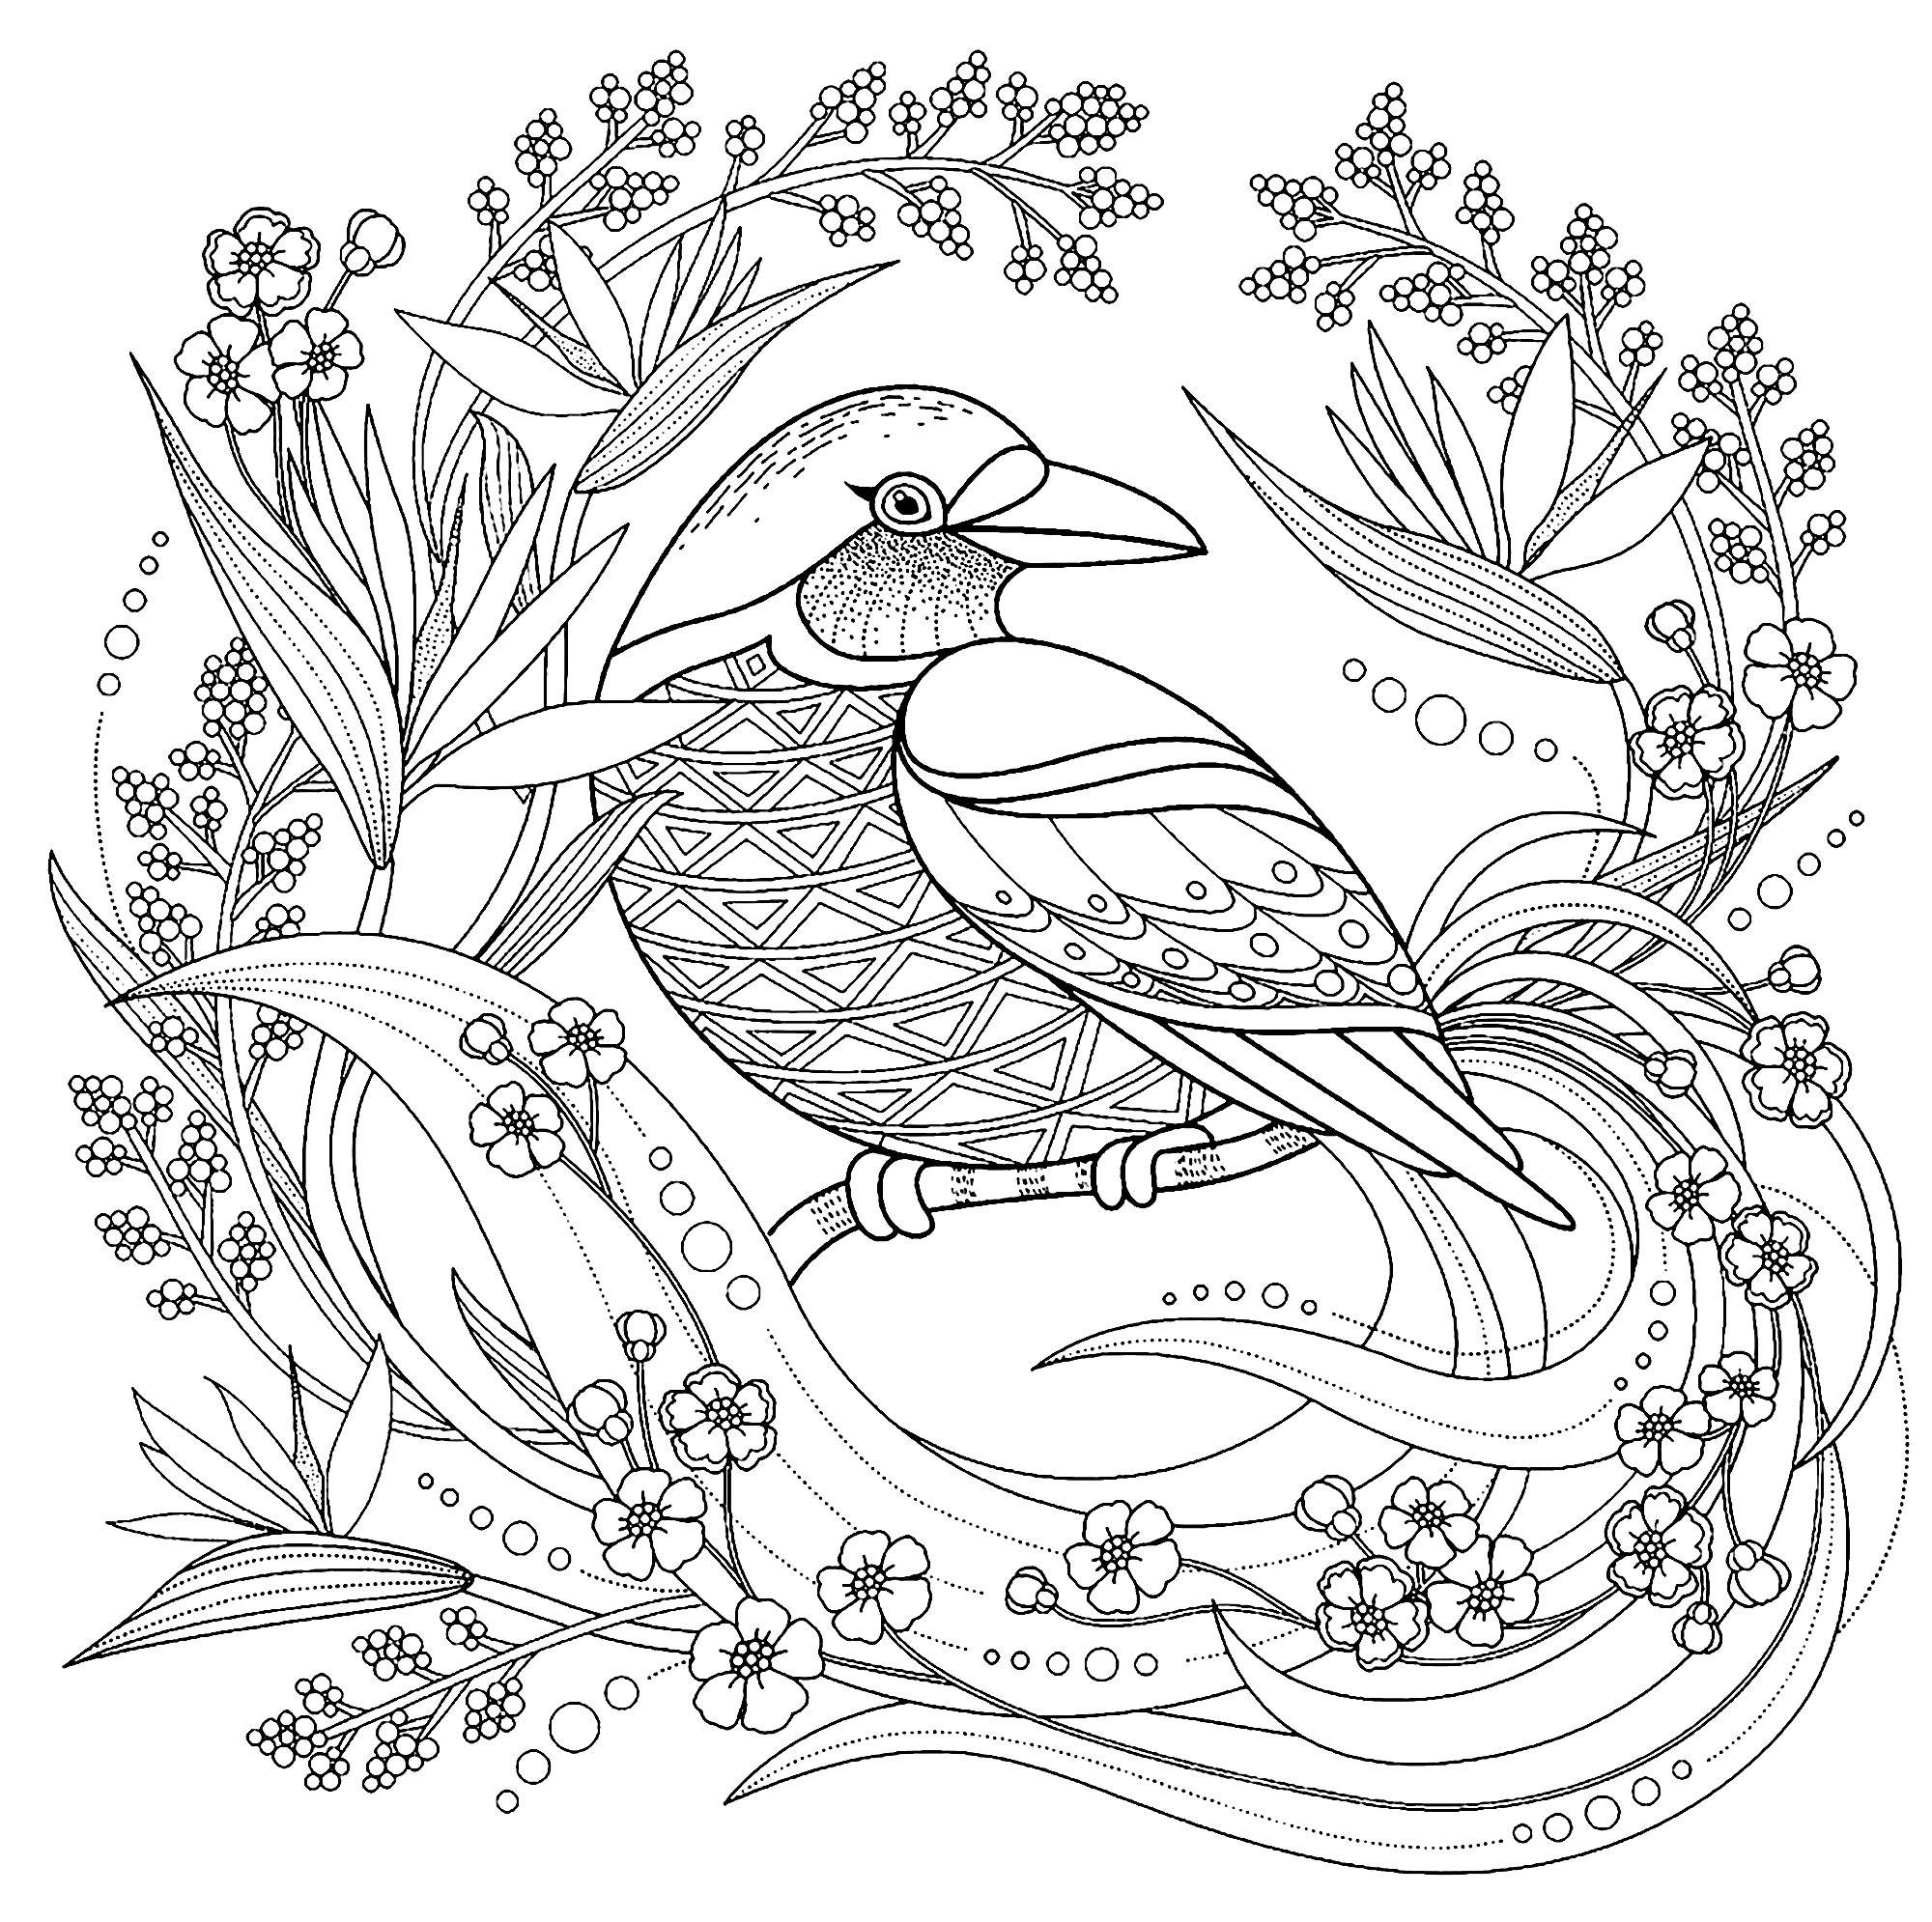 colouring pages for birds bird coloring pages pages colouring birds for 